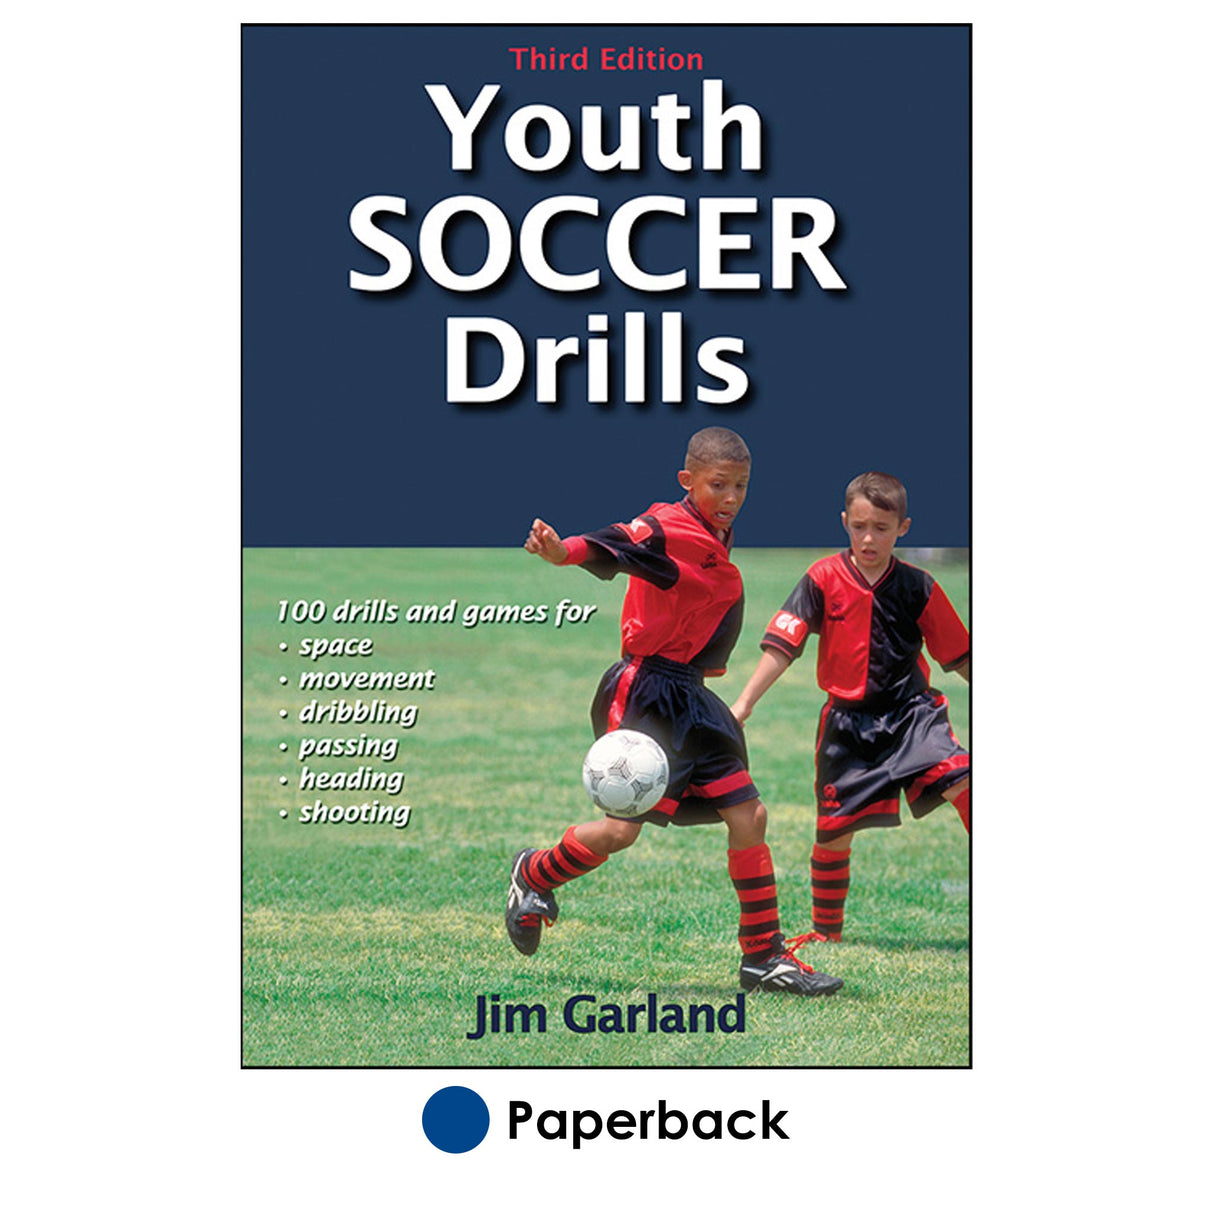 Youth Soccer Drills-3rd Edition